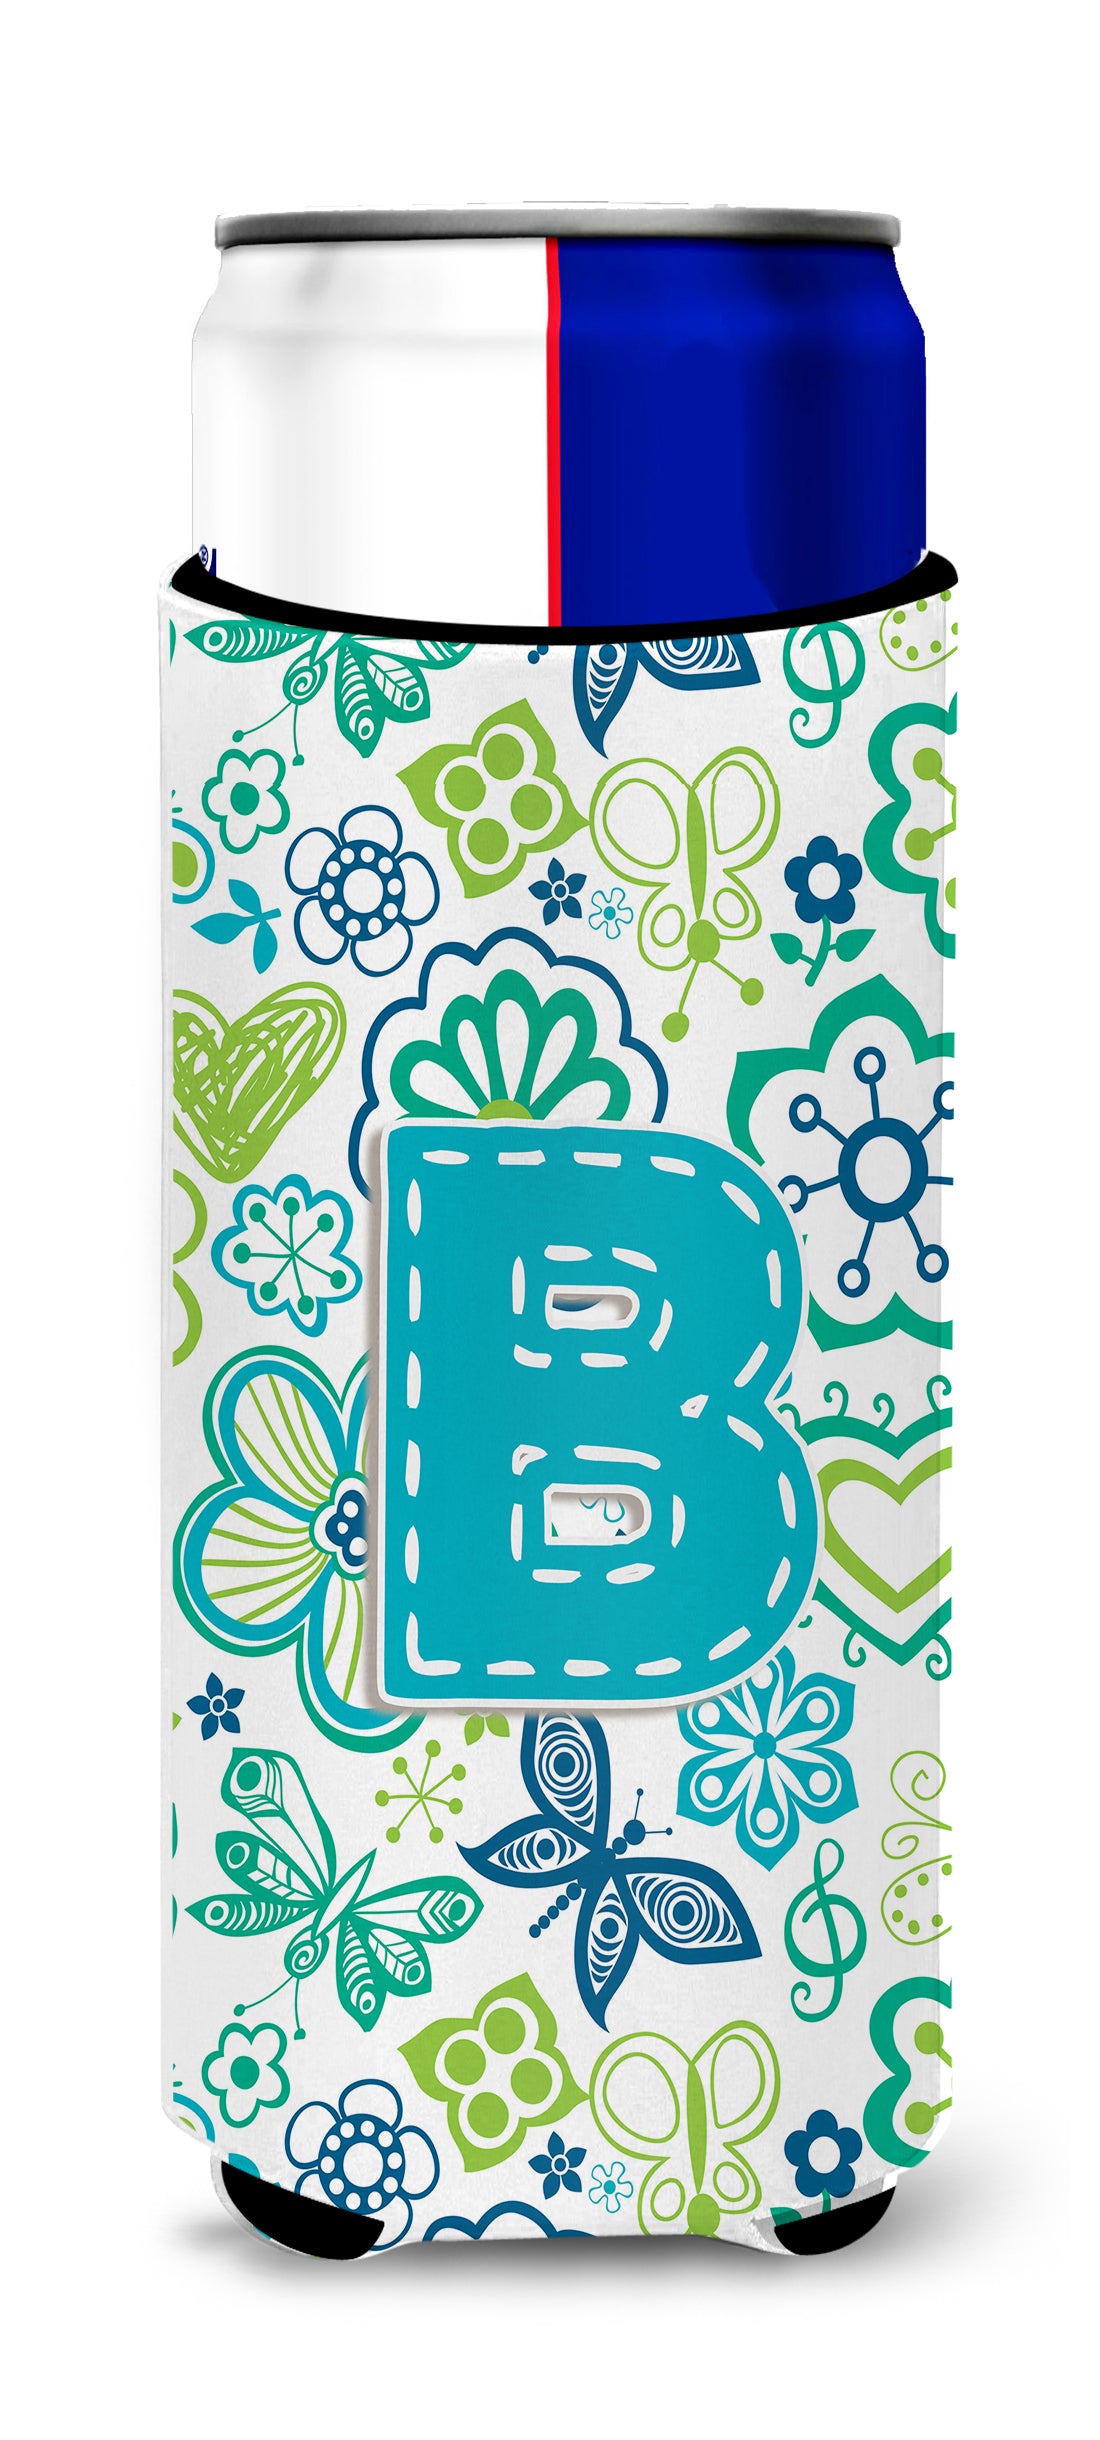 Letter B Flowers and Butterflies Teal Blue Ultra Beverage Insulators for slim cans CJ2006-BMUK.